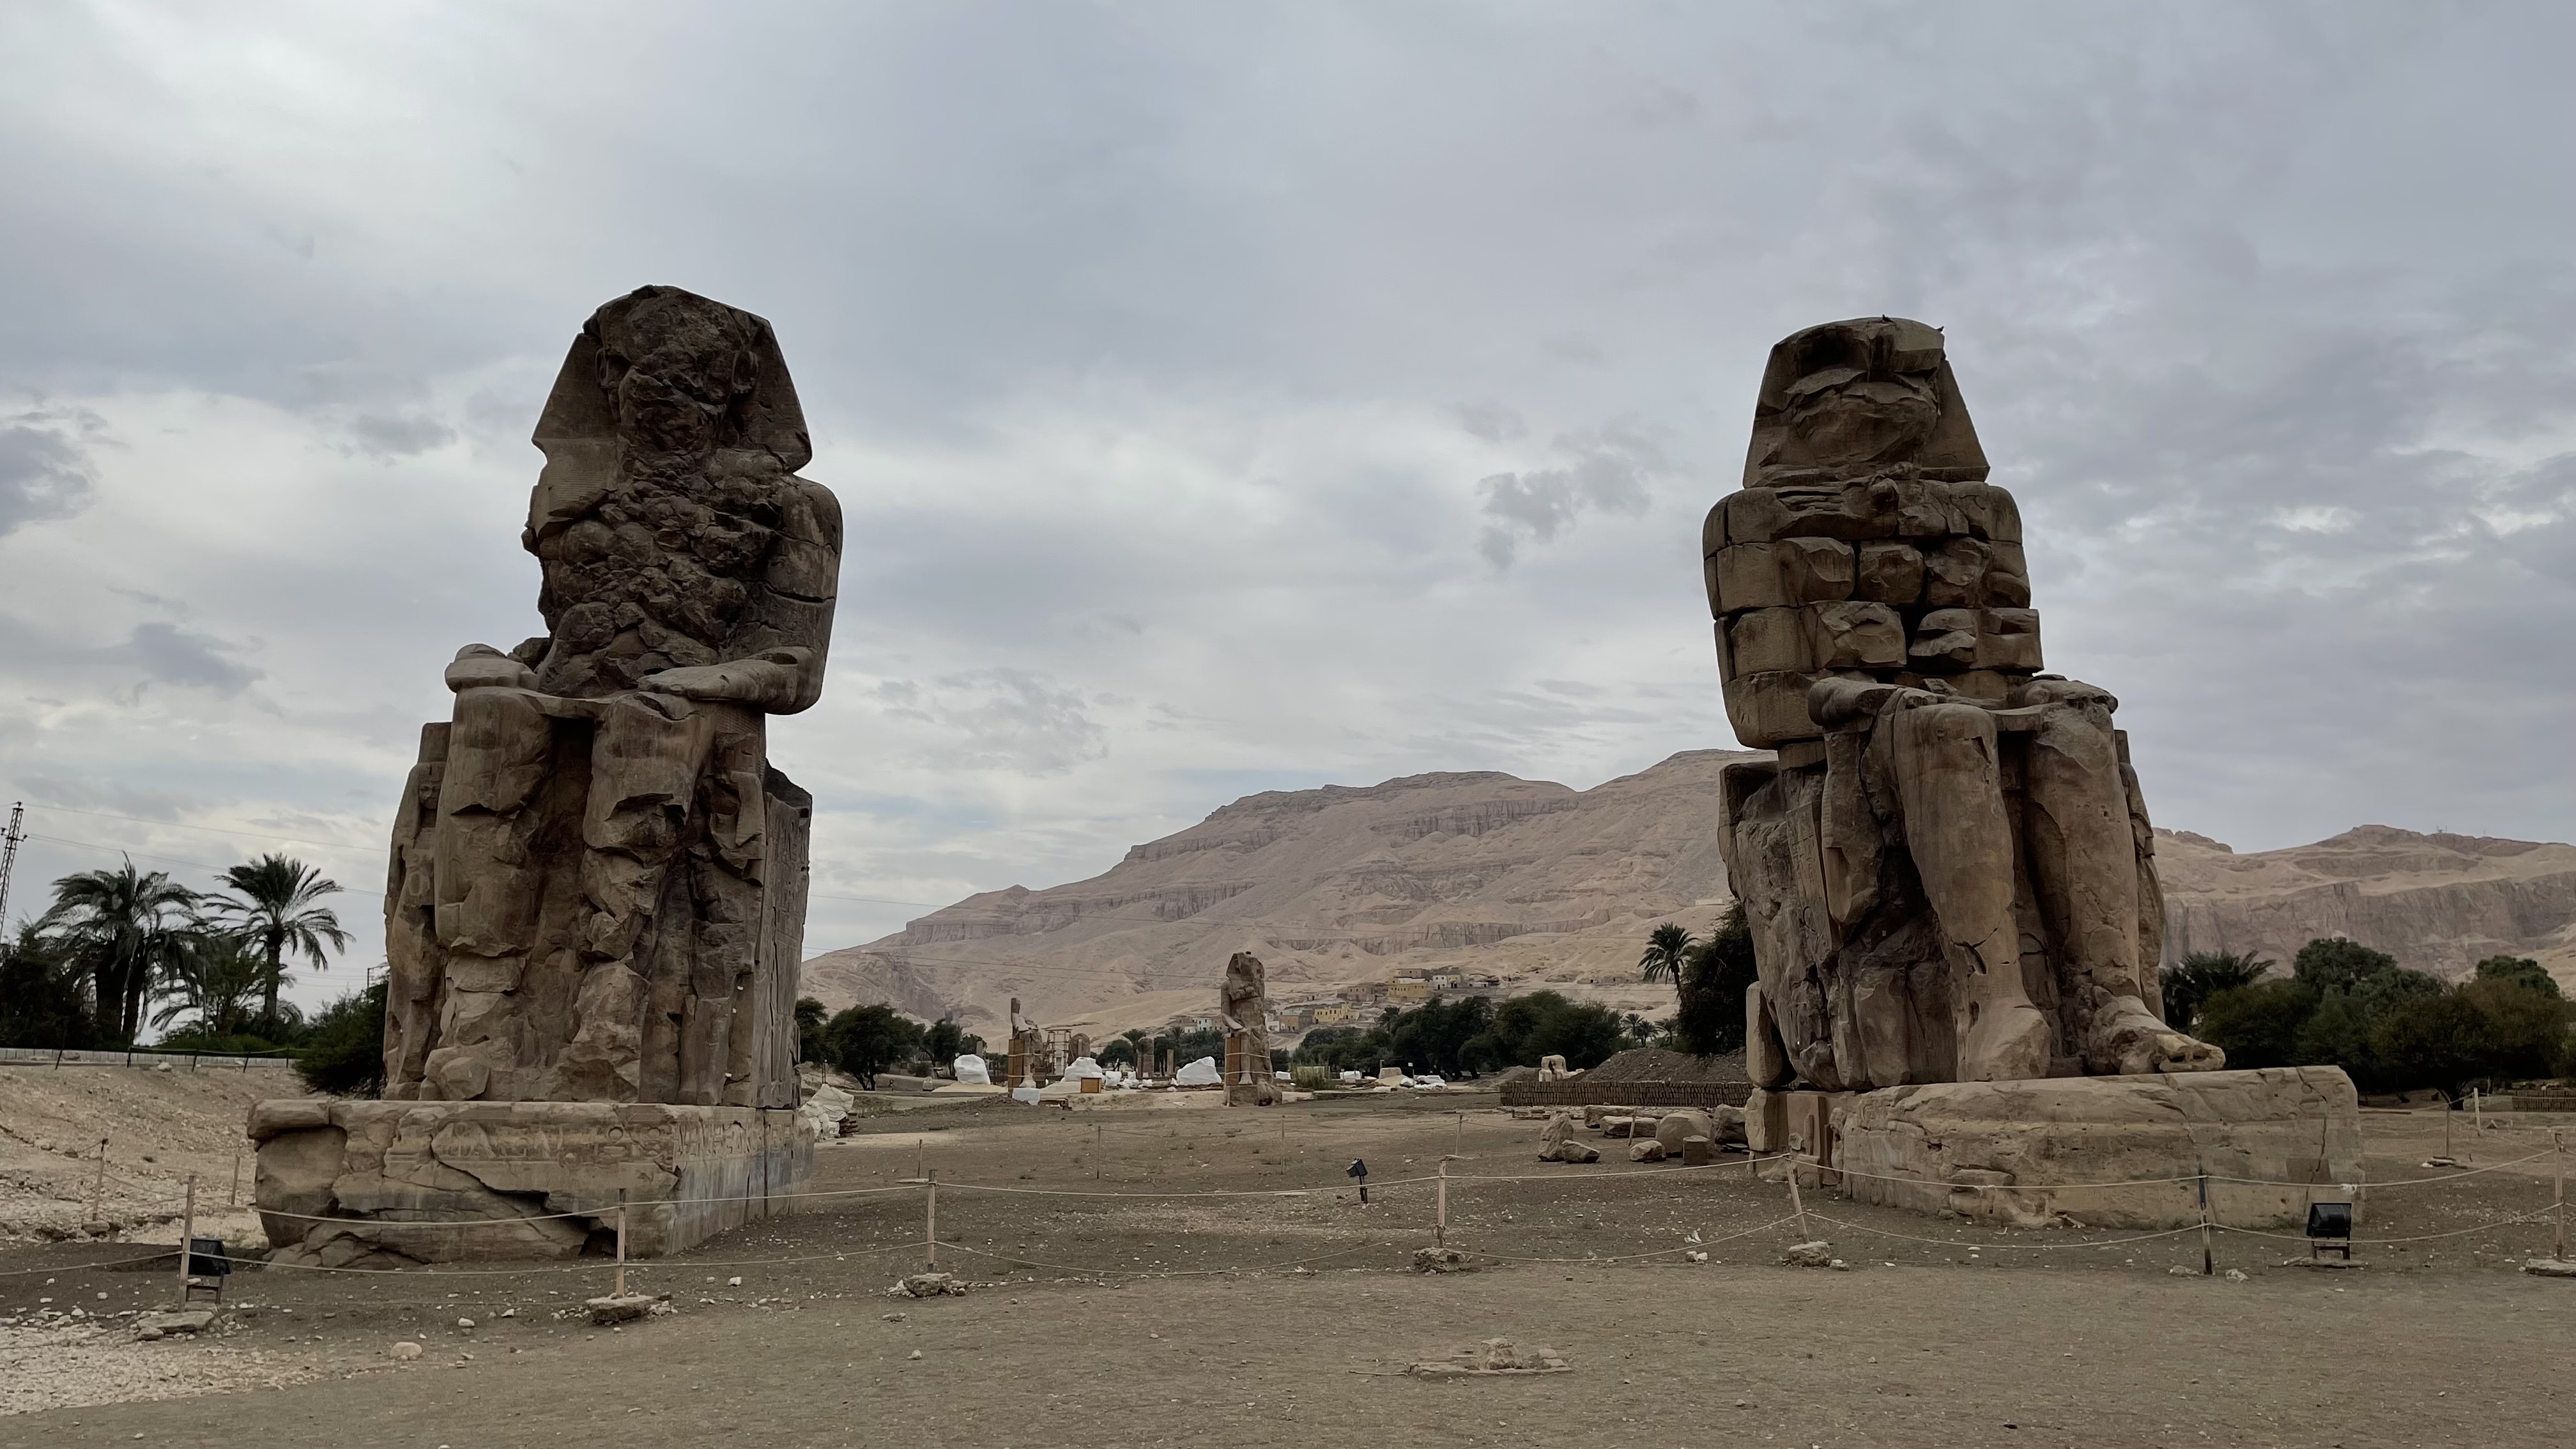 The Colossi of Memnon at the Mortuary Temple of Amenhotep III